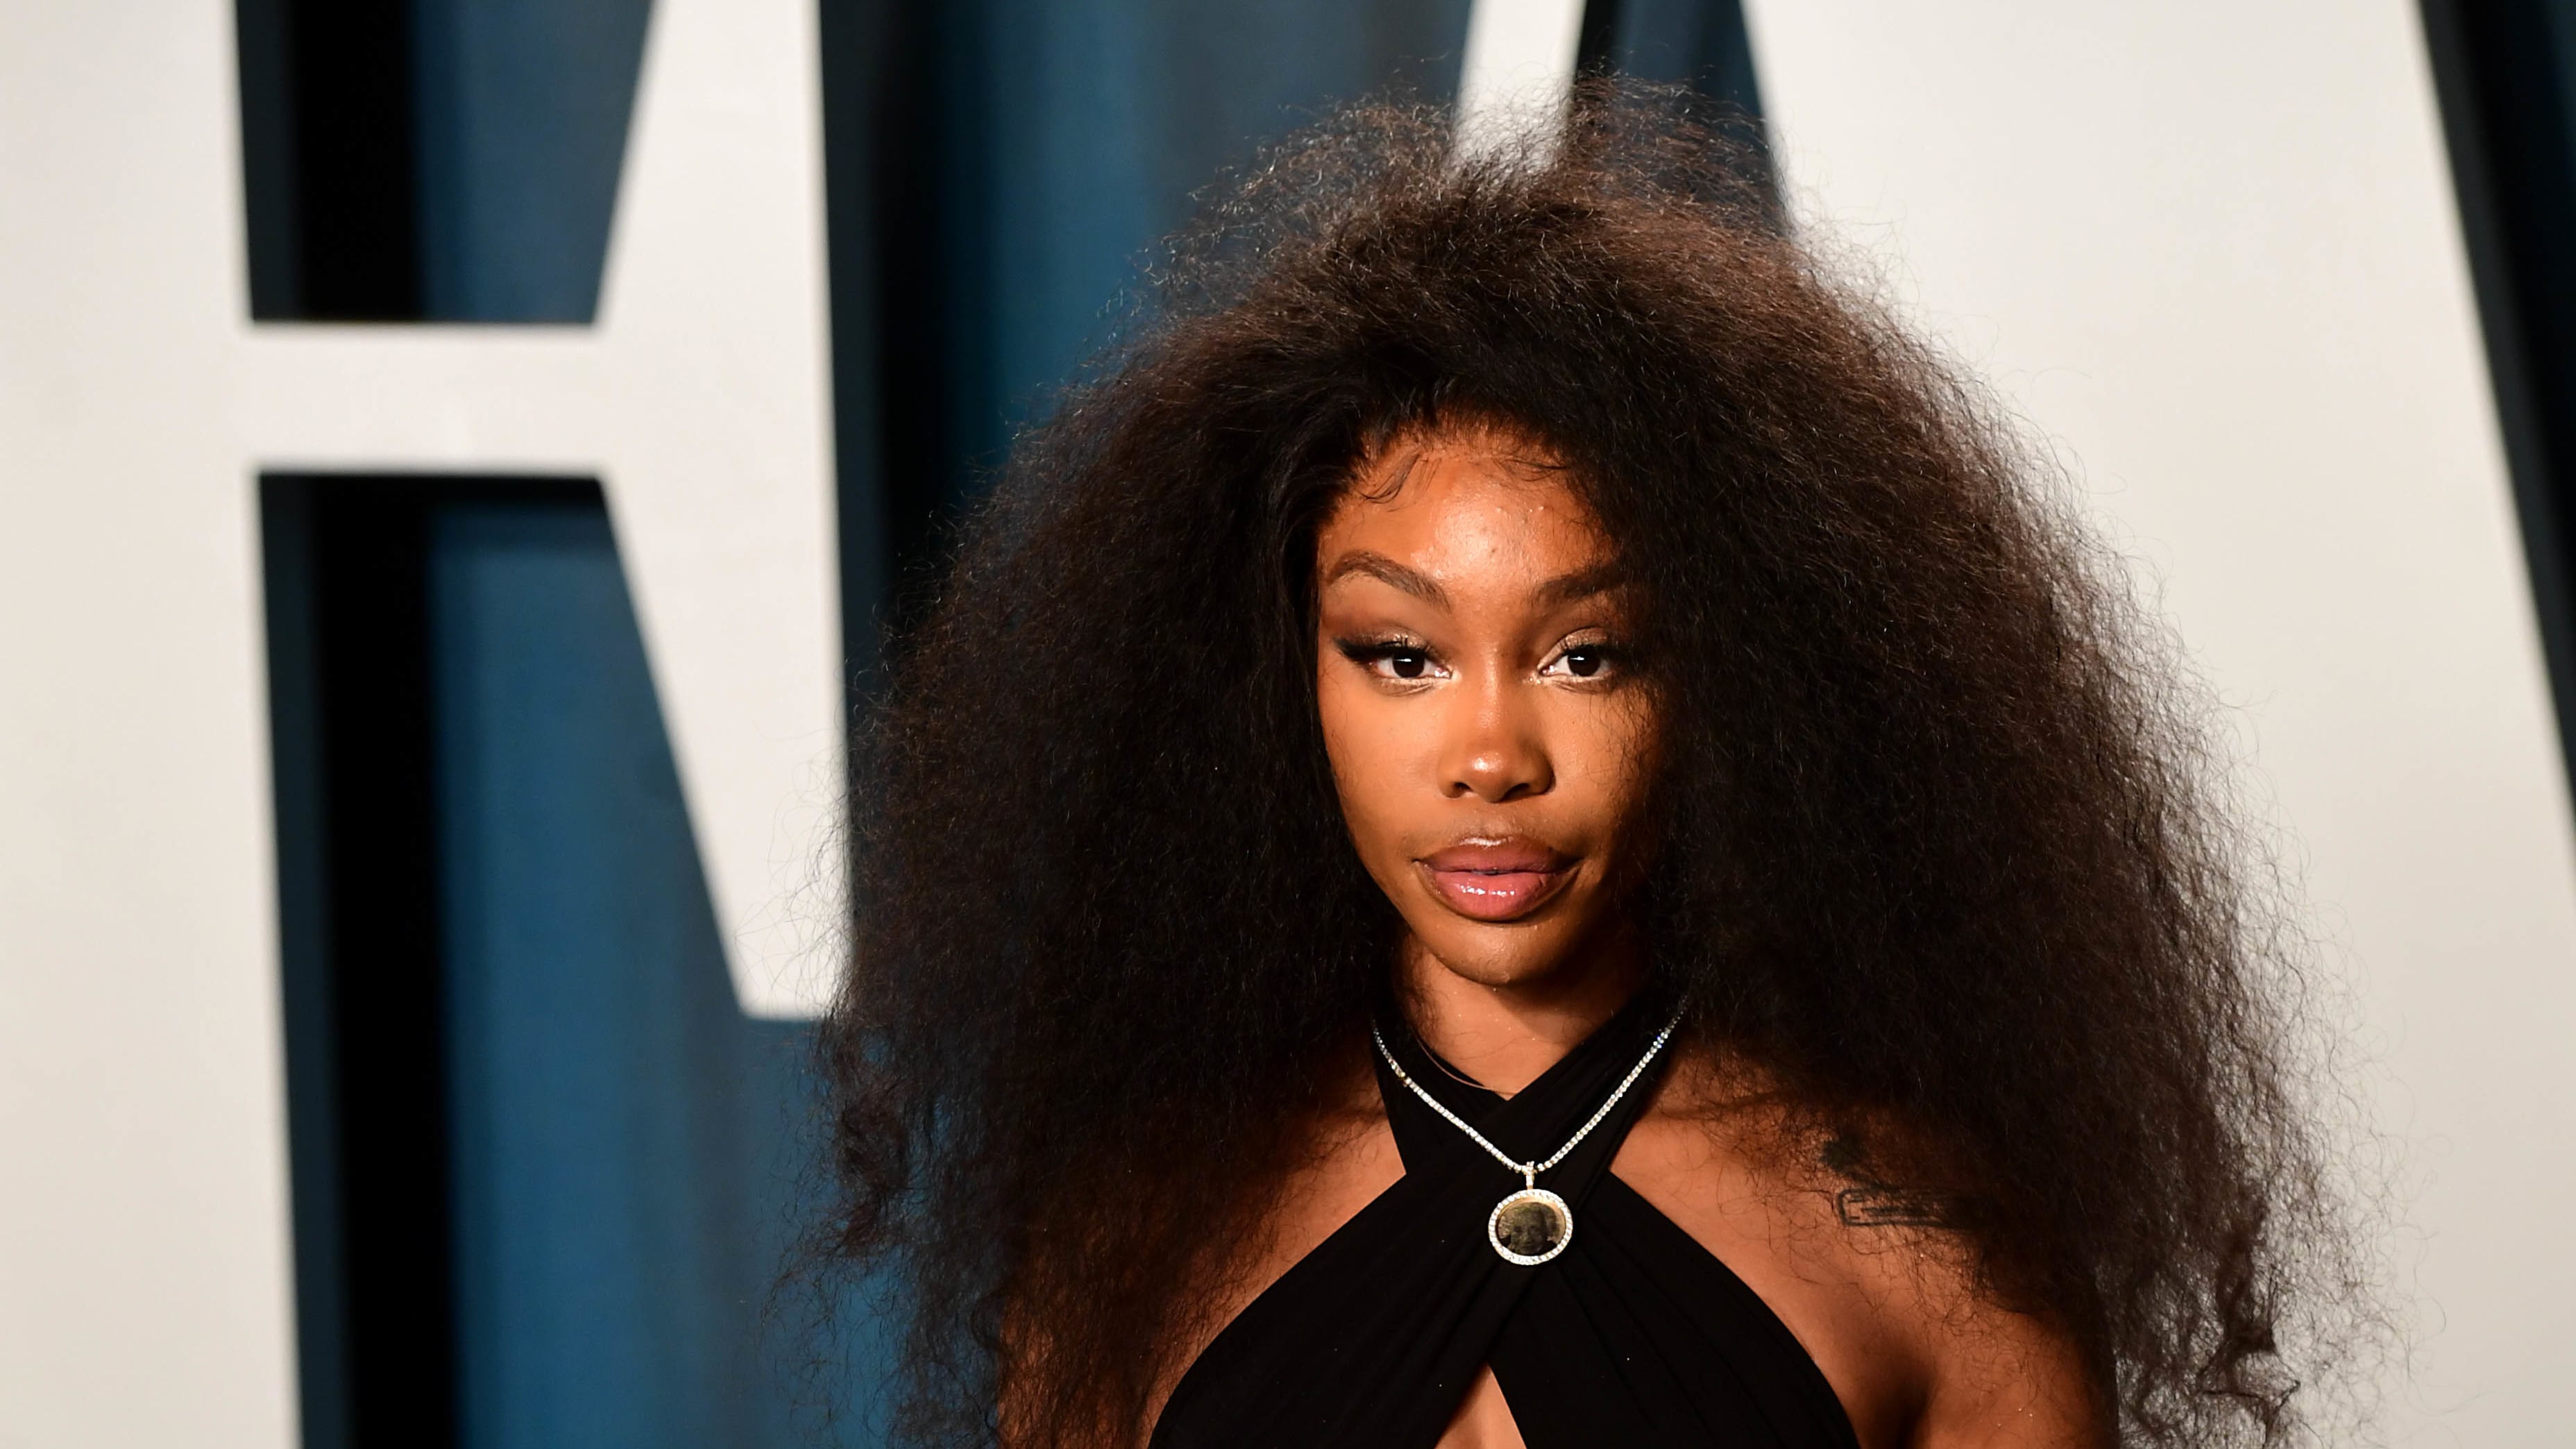 SZA debuted a new backdrop and set ahead of her Glastonbury headline set